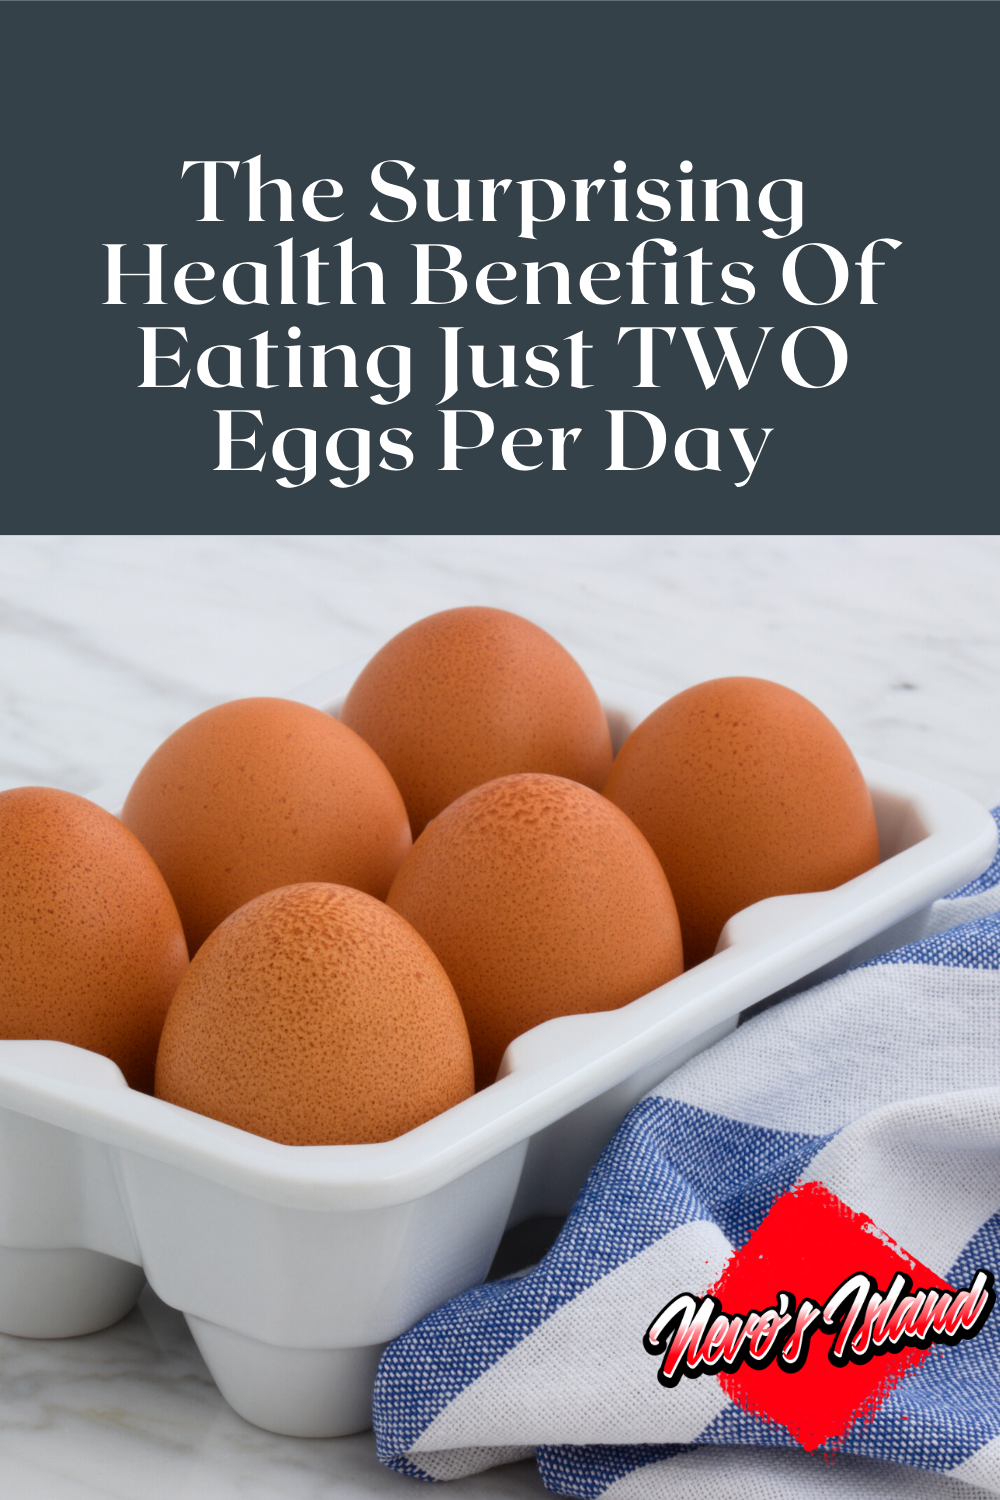 The Surprising Health Benefits Of Eating Just TWO Eggs Per ...